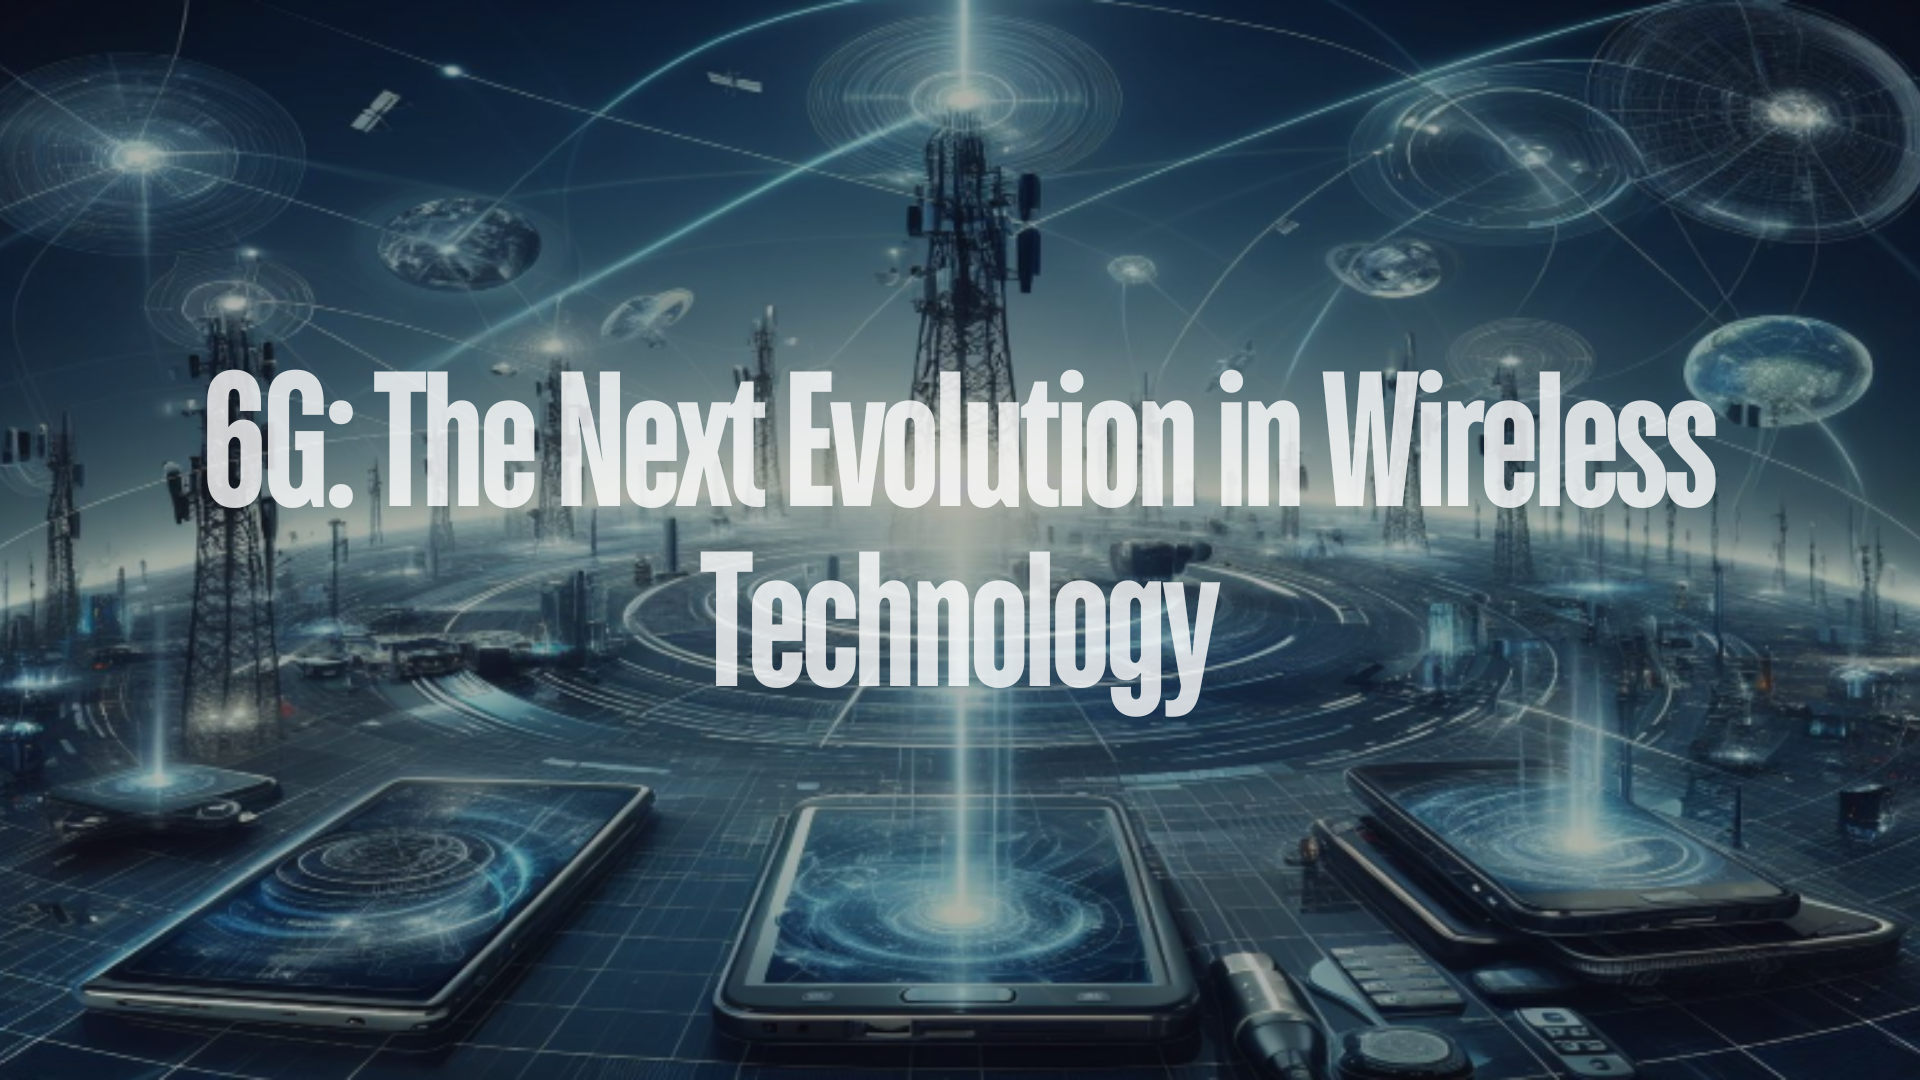 Discover the future of wireless communication with 6G technology, offering extreme speeds, ultra-low latency, massive connectivity, and more.